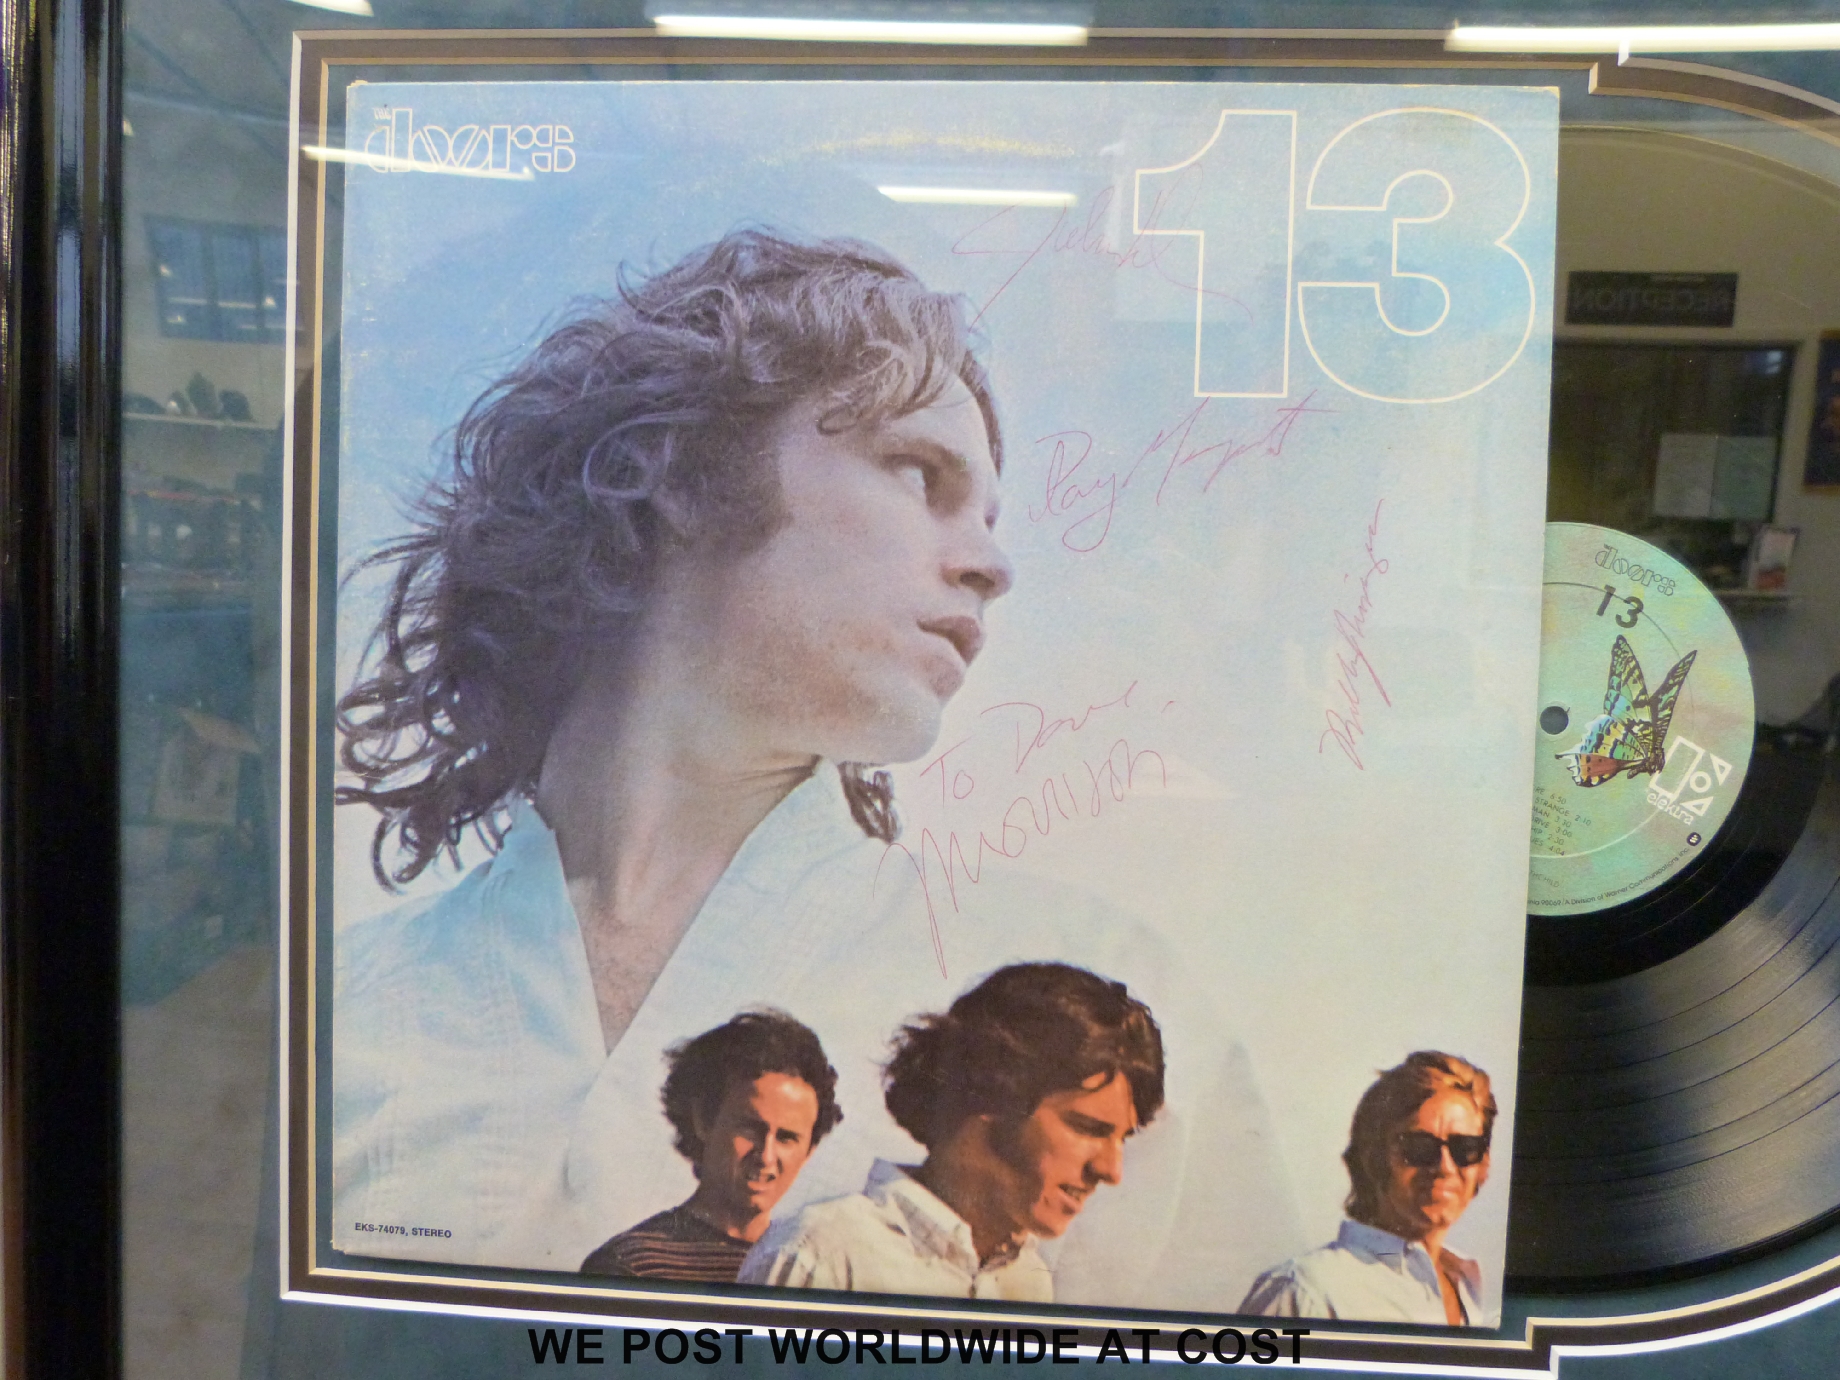 An autographed montage of the Doors album 13.